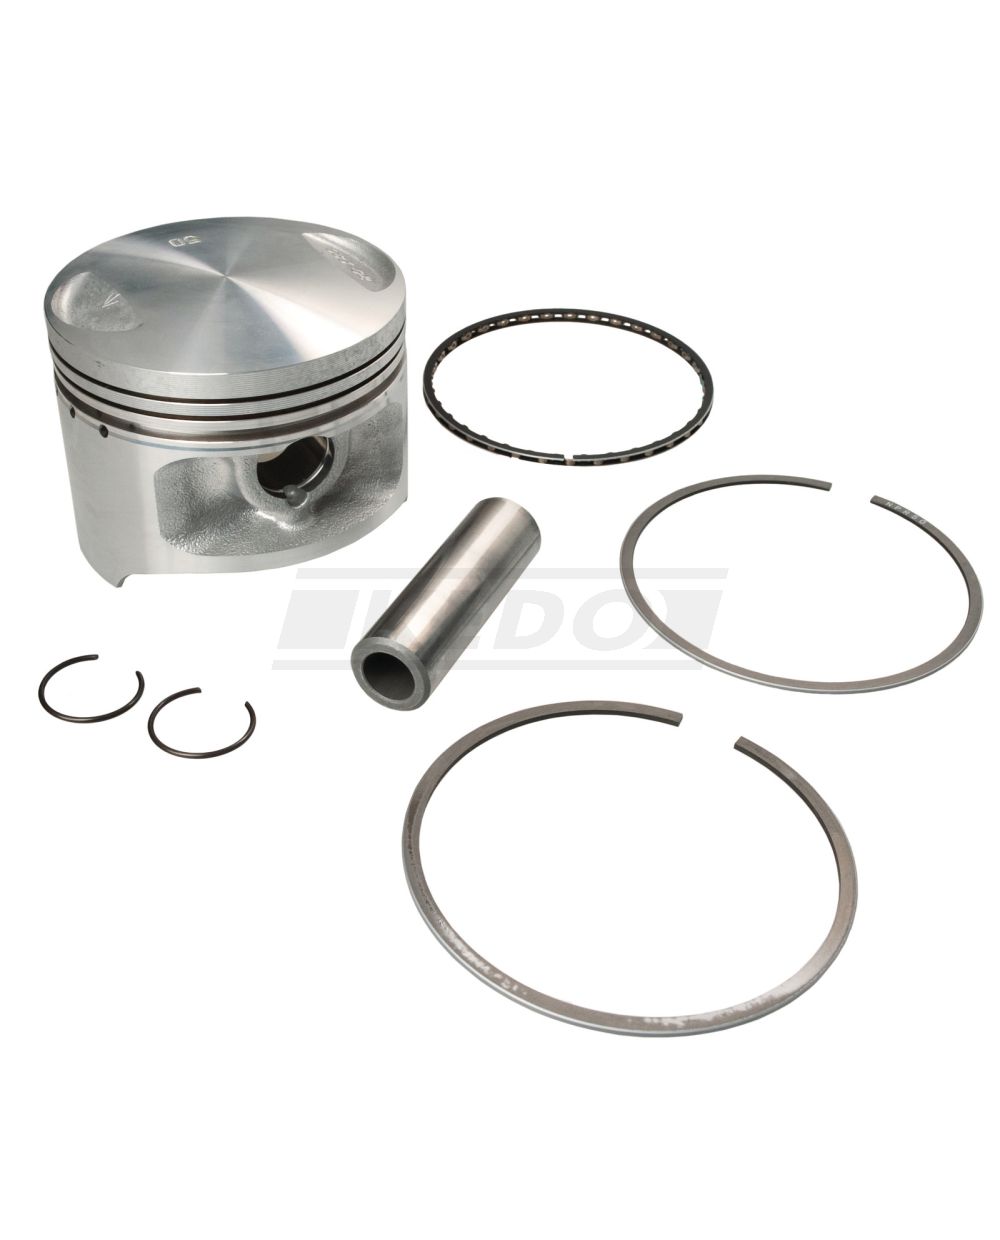 TRW Forged Piston Kit, Complete with Rings, Pin & Locks for Harley-Davidson  Overhead Valve Big Twin 74